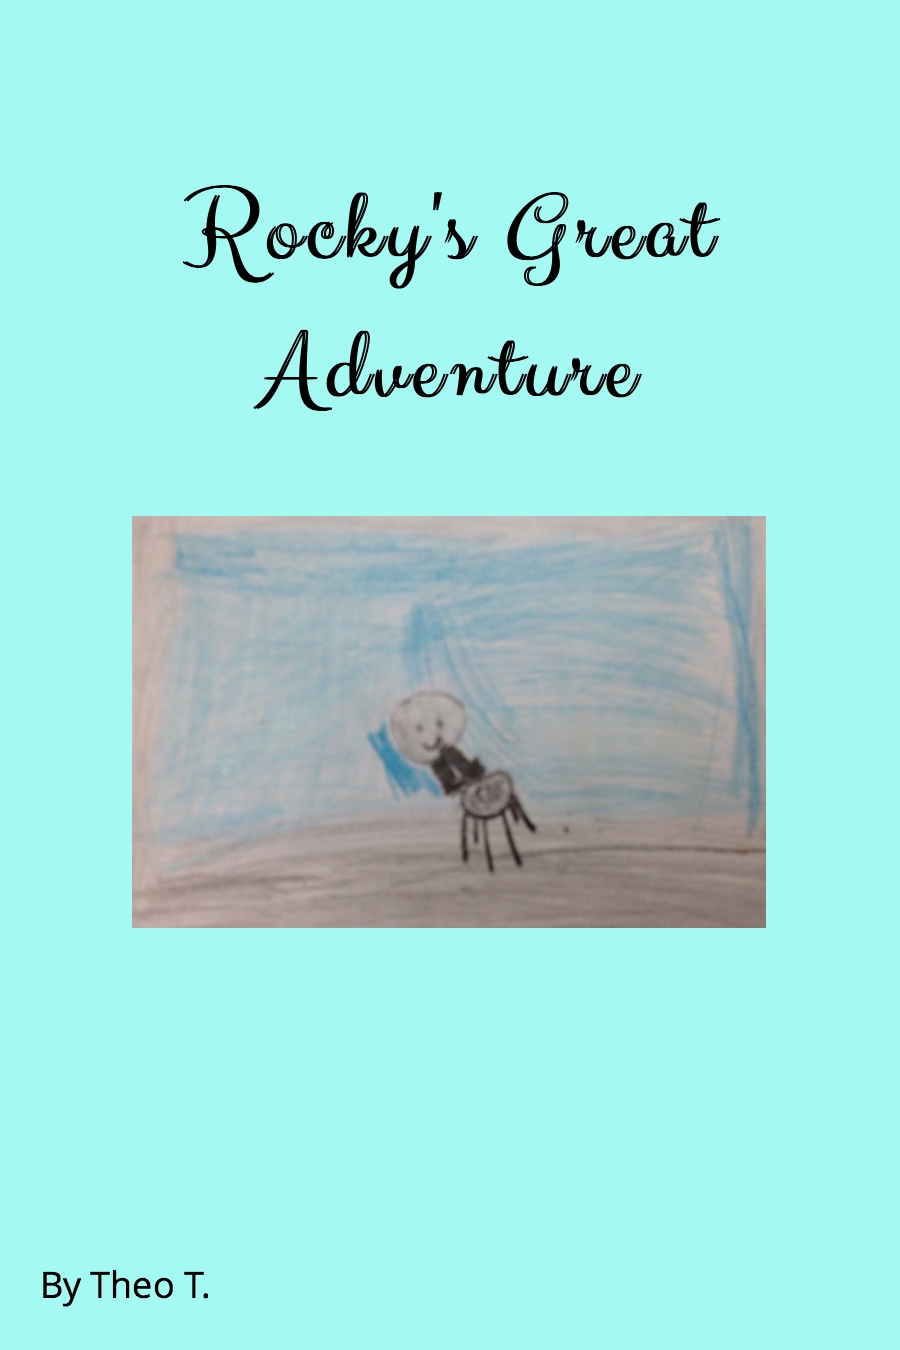 Rocky’s Great Adventure by Theodore Theo T